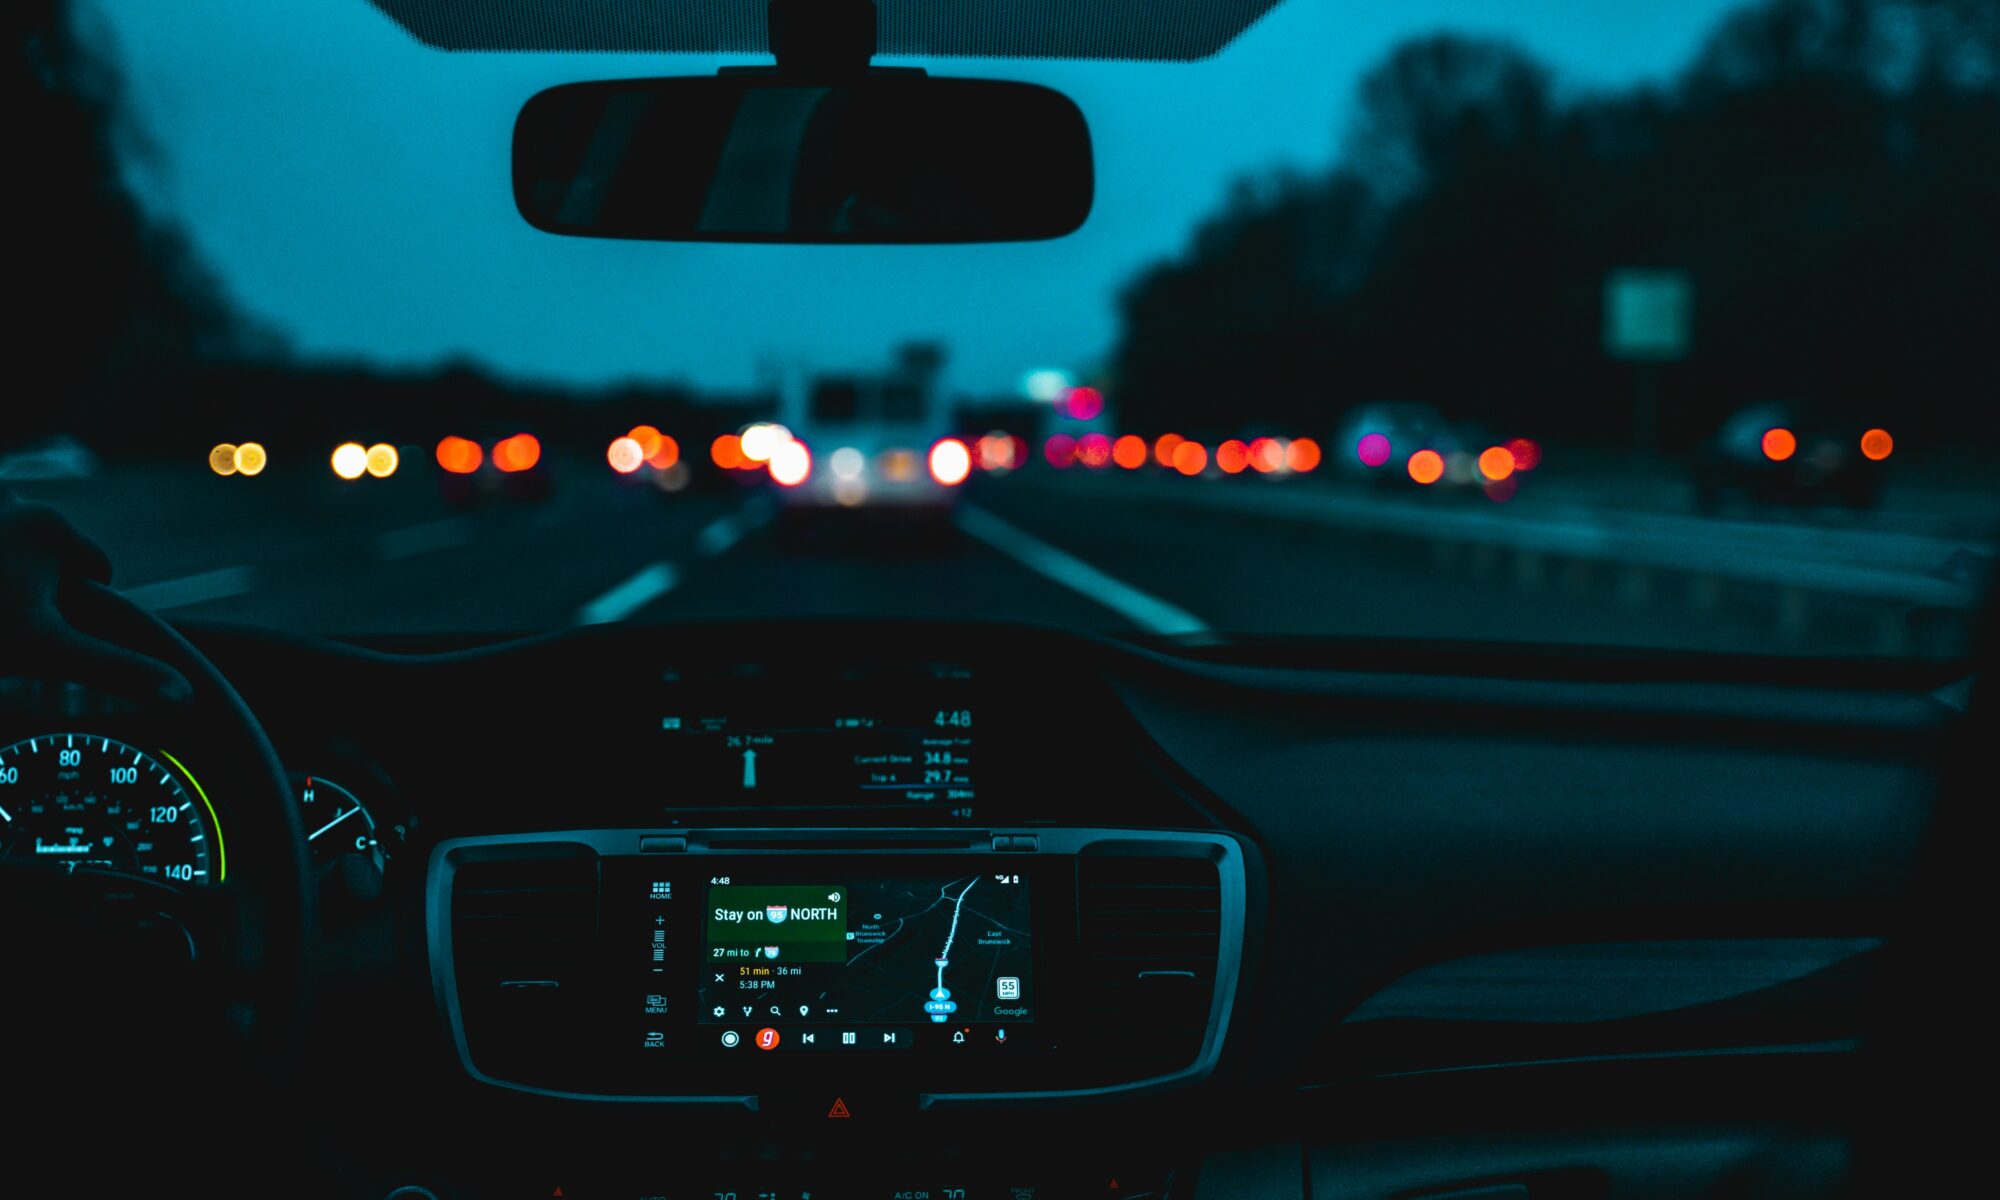 close up of a car's dash and review mirror driving at night